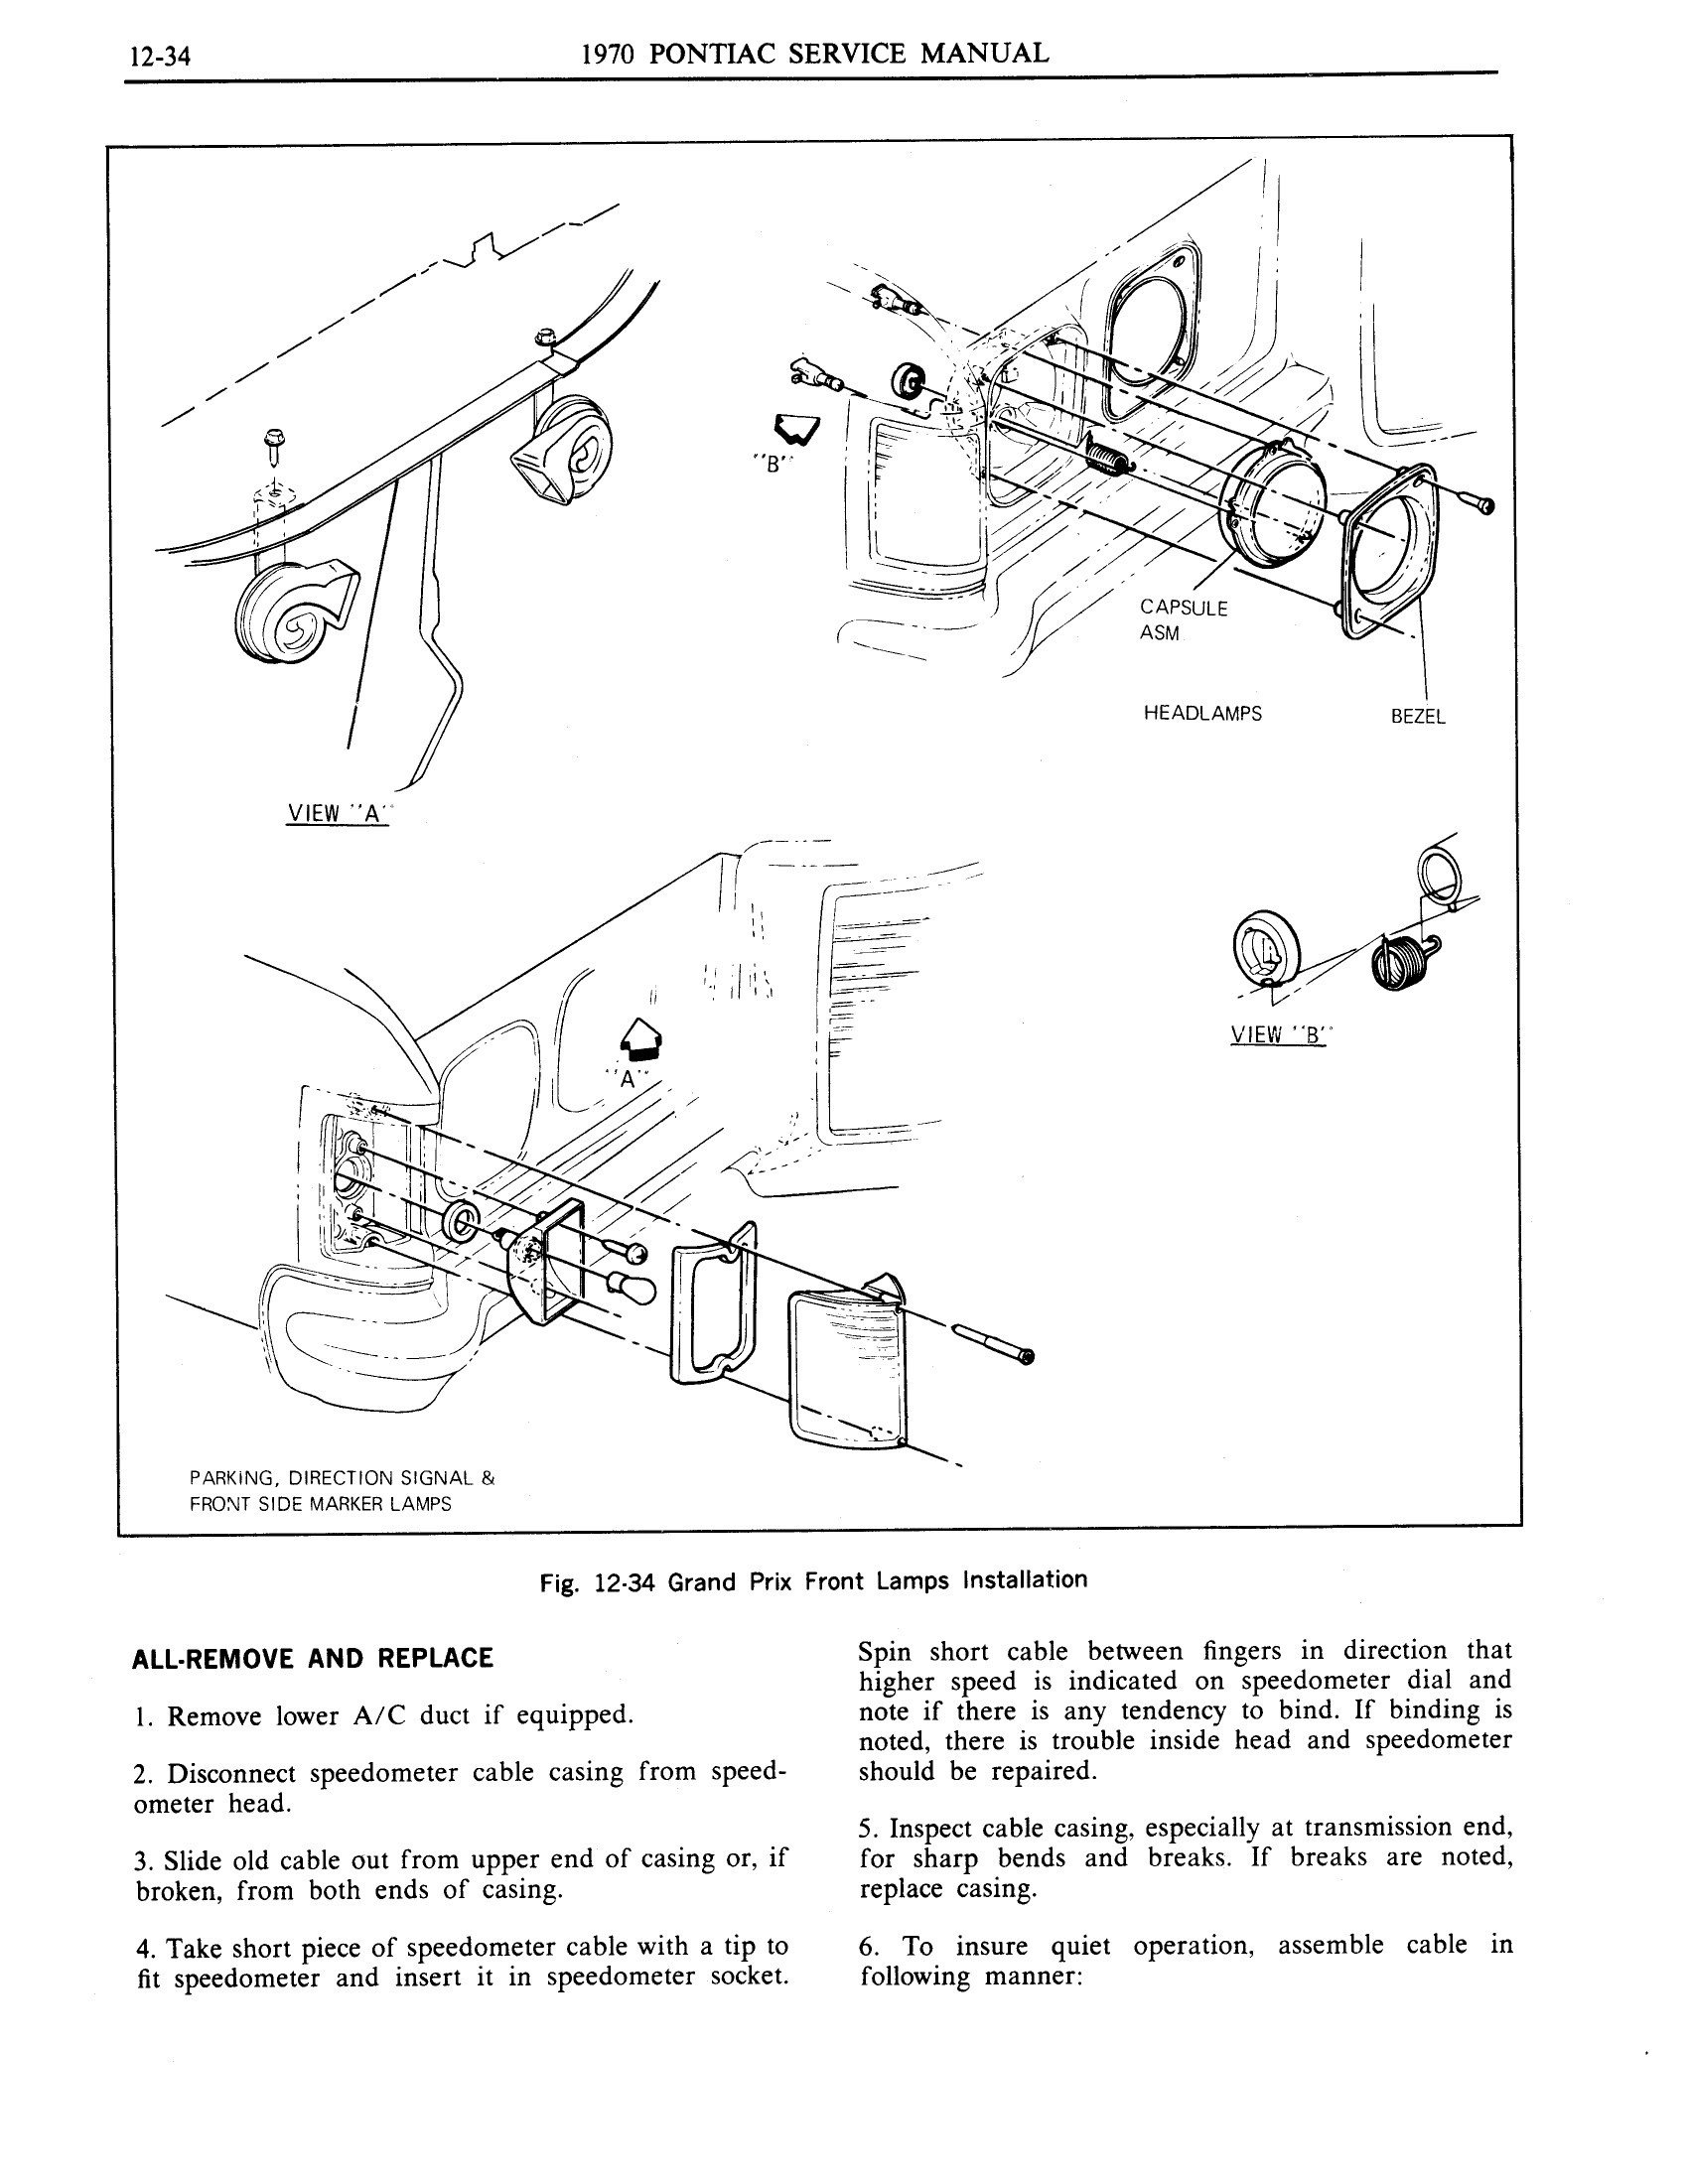 1970 Pontiac Chassis Service Manual - Chassis Electrical Page 34 of 67